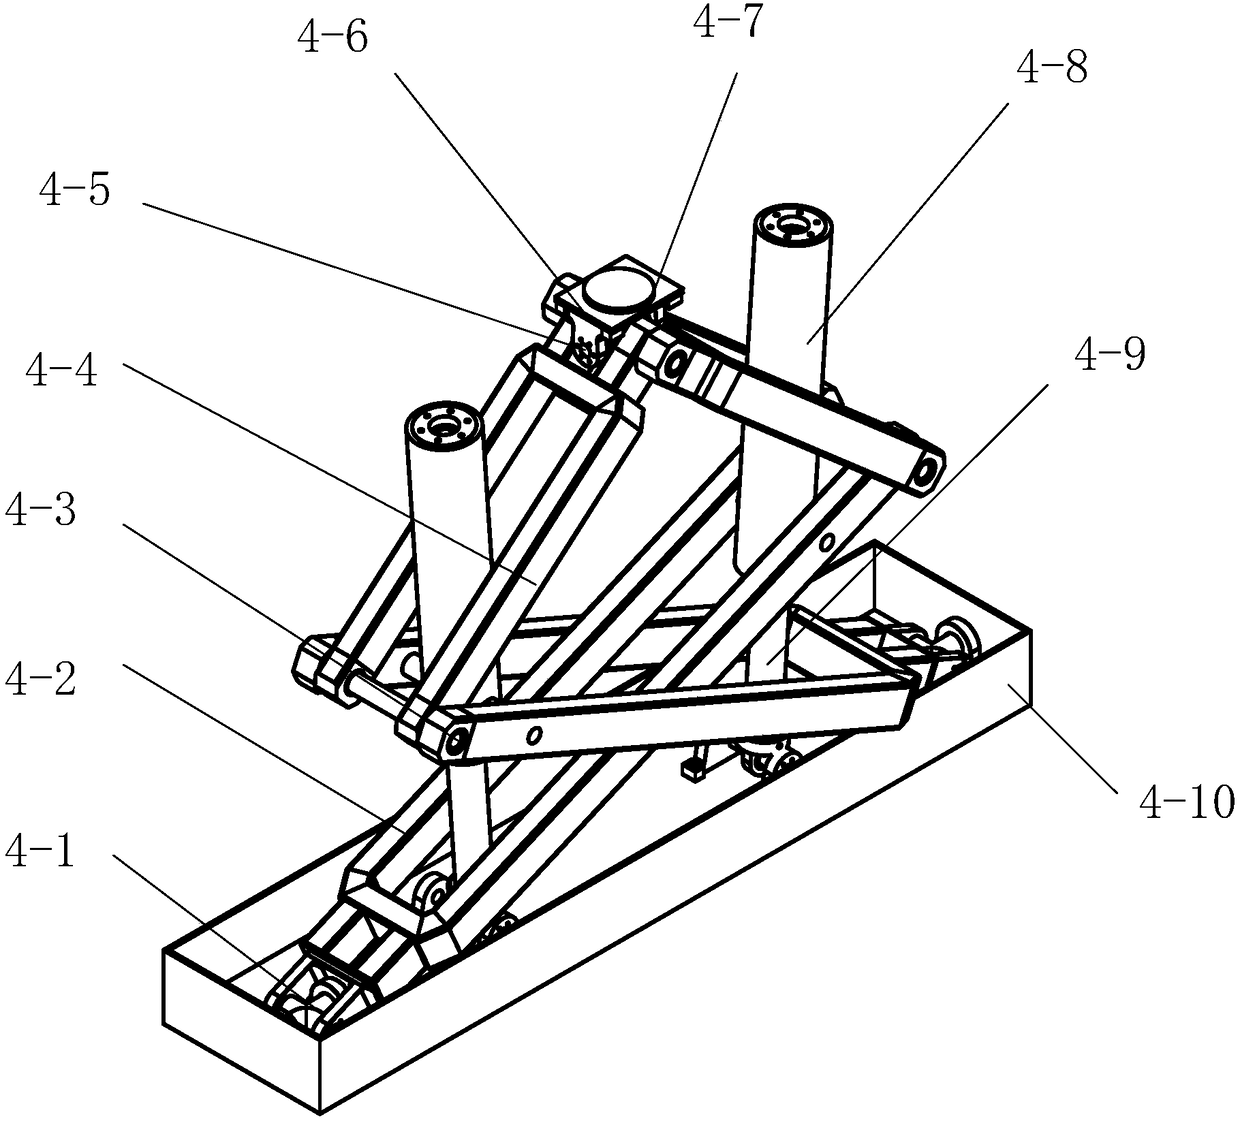 A Parallel Stable Receiving Platform with Double-Driven Cross-Folding Branches